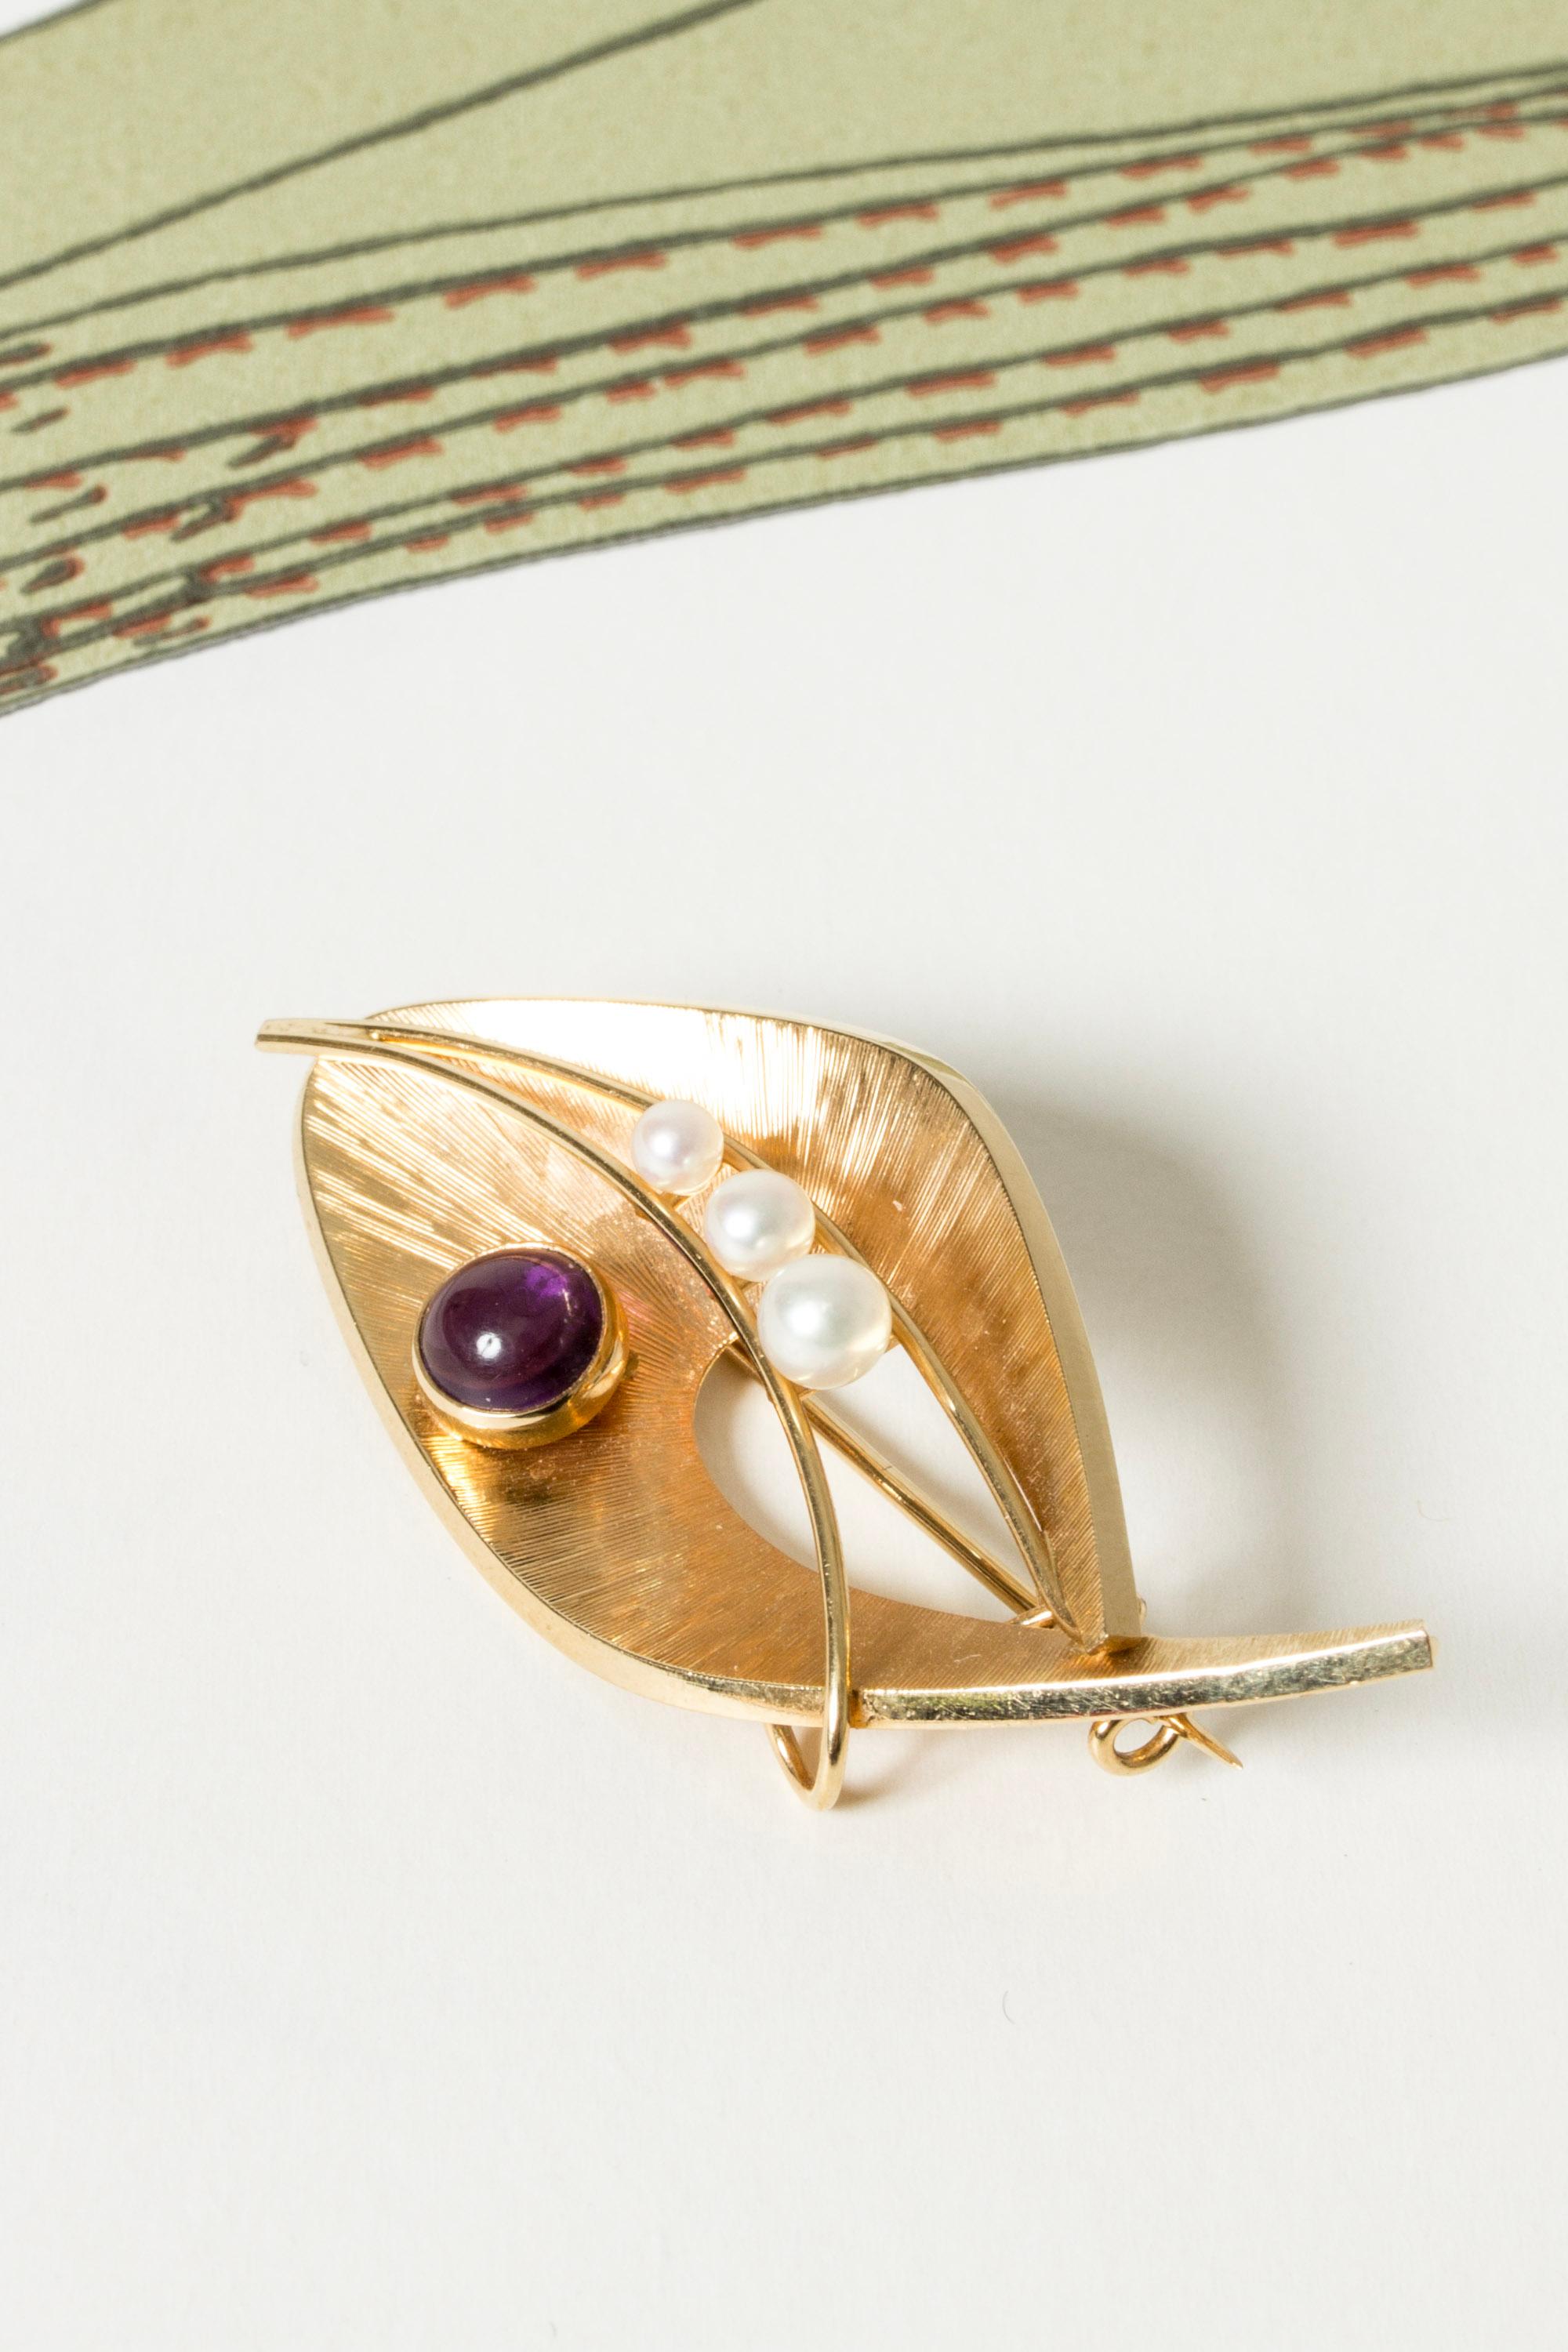 Swedish Modernist gold brooch in a sweet, organic design with nice details. Cabochon cut amethyst stone and a row of small pearls.

Maker: Guldsmedsateljé G B Nilsson, Sweden